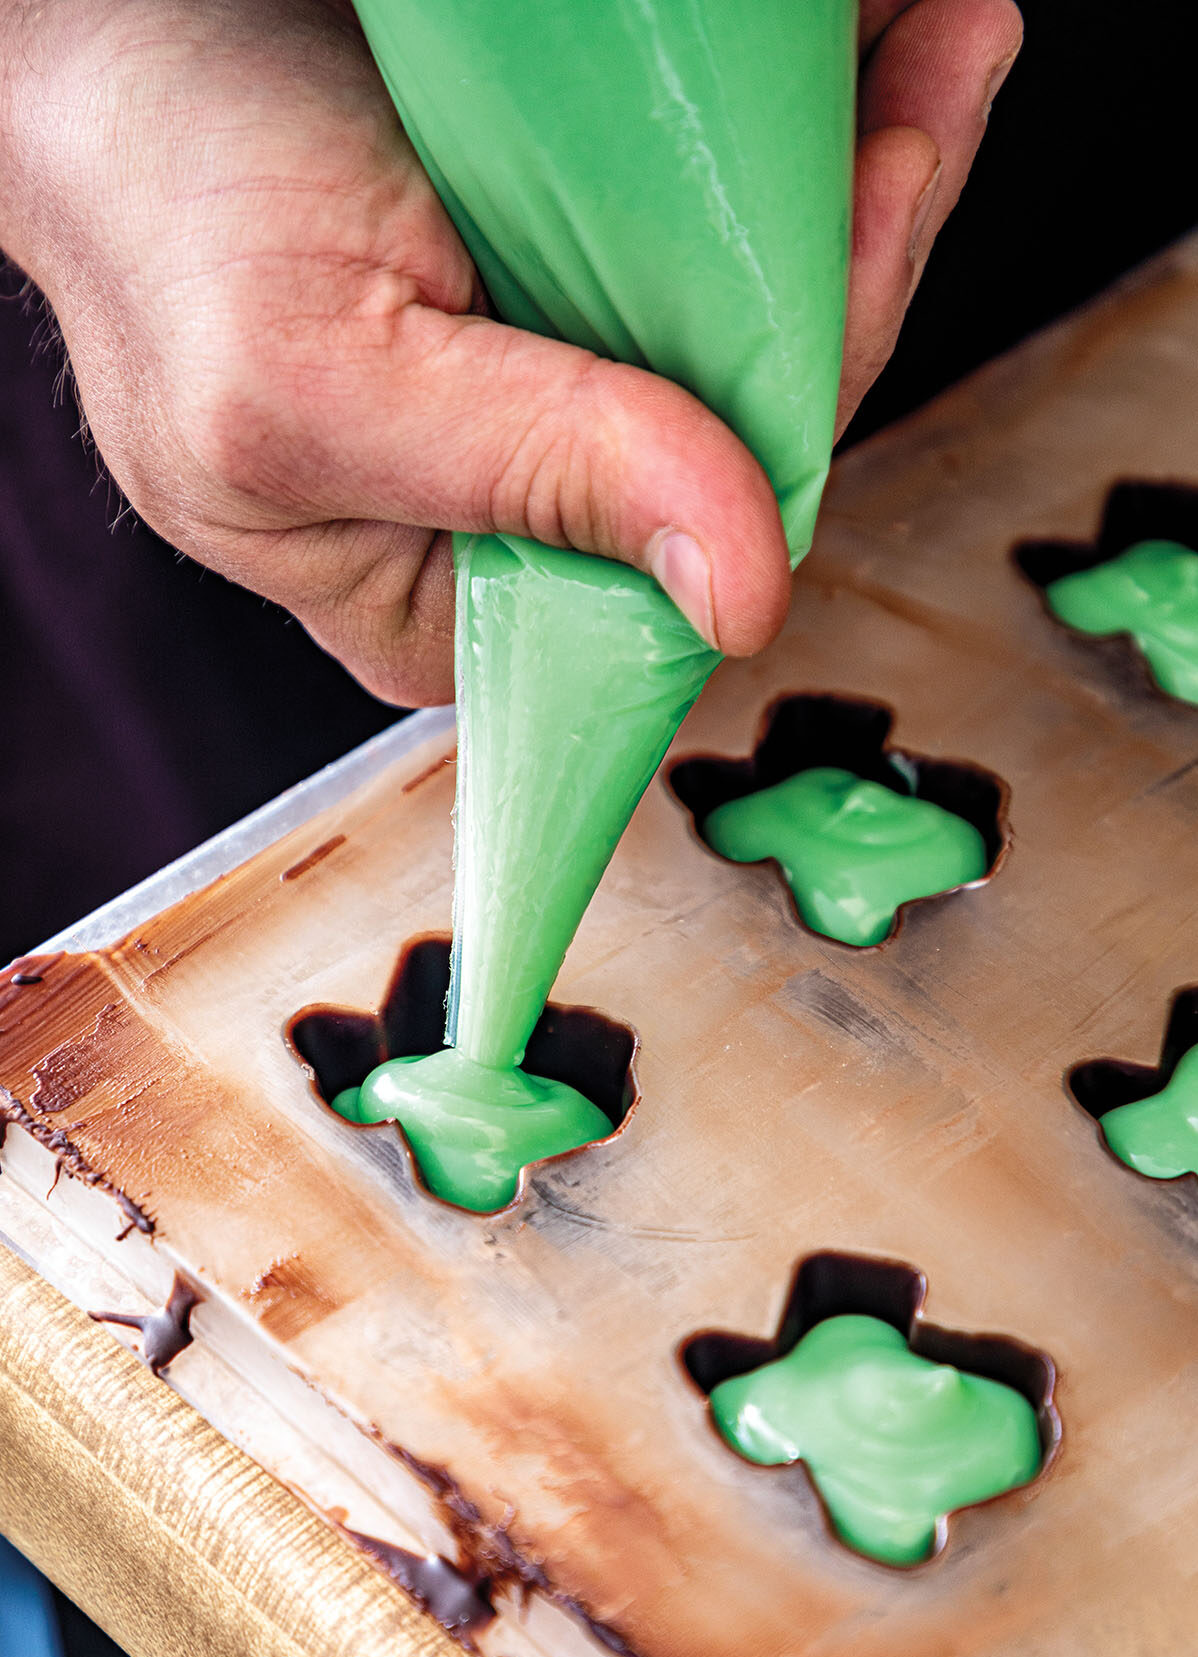 A green piping bag fills texas-shaped molds with green chocolate